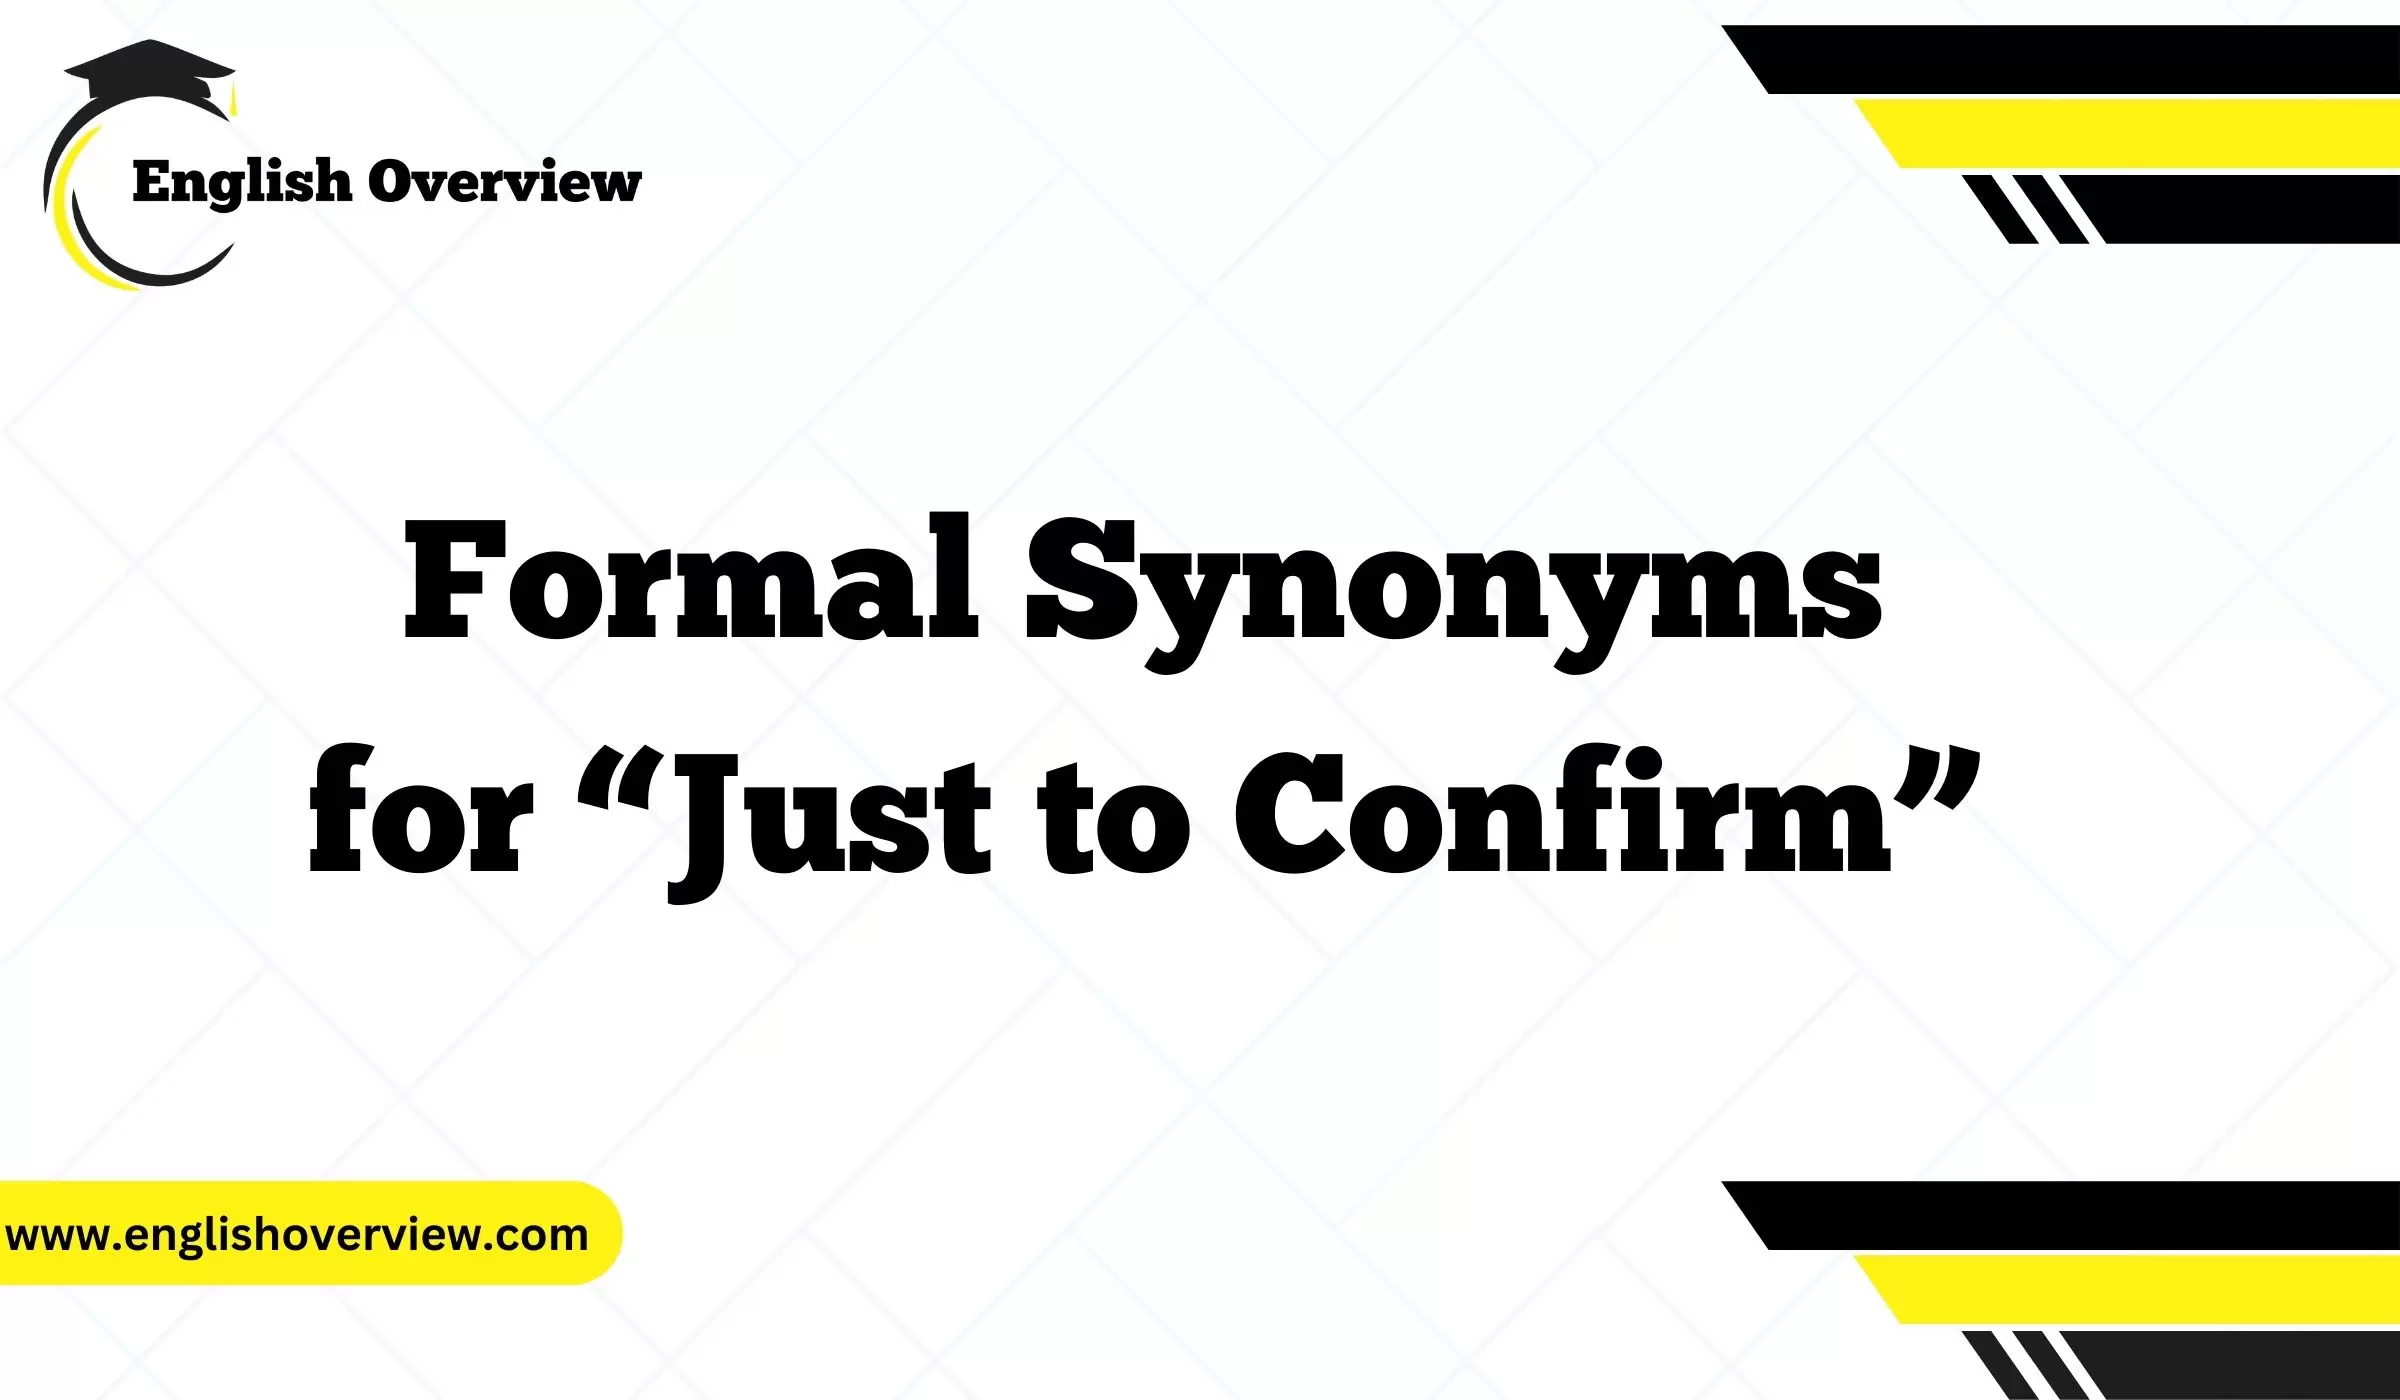 Formal Synonyms for “Just to Confirm”